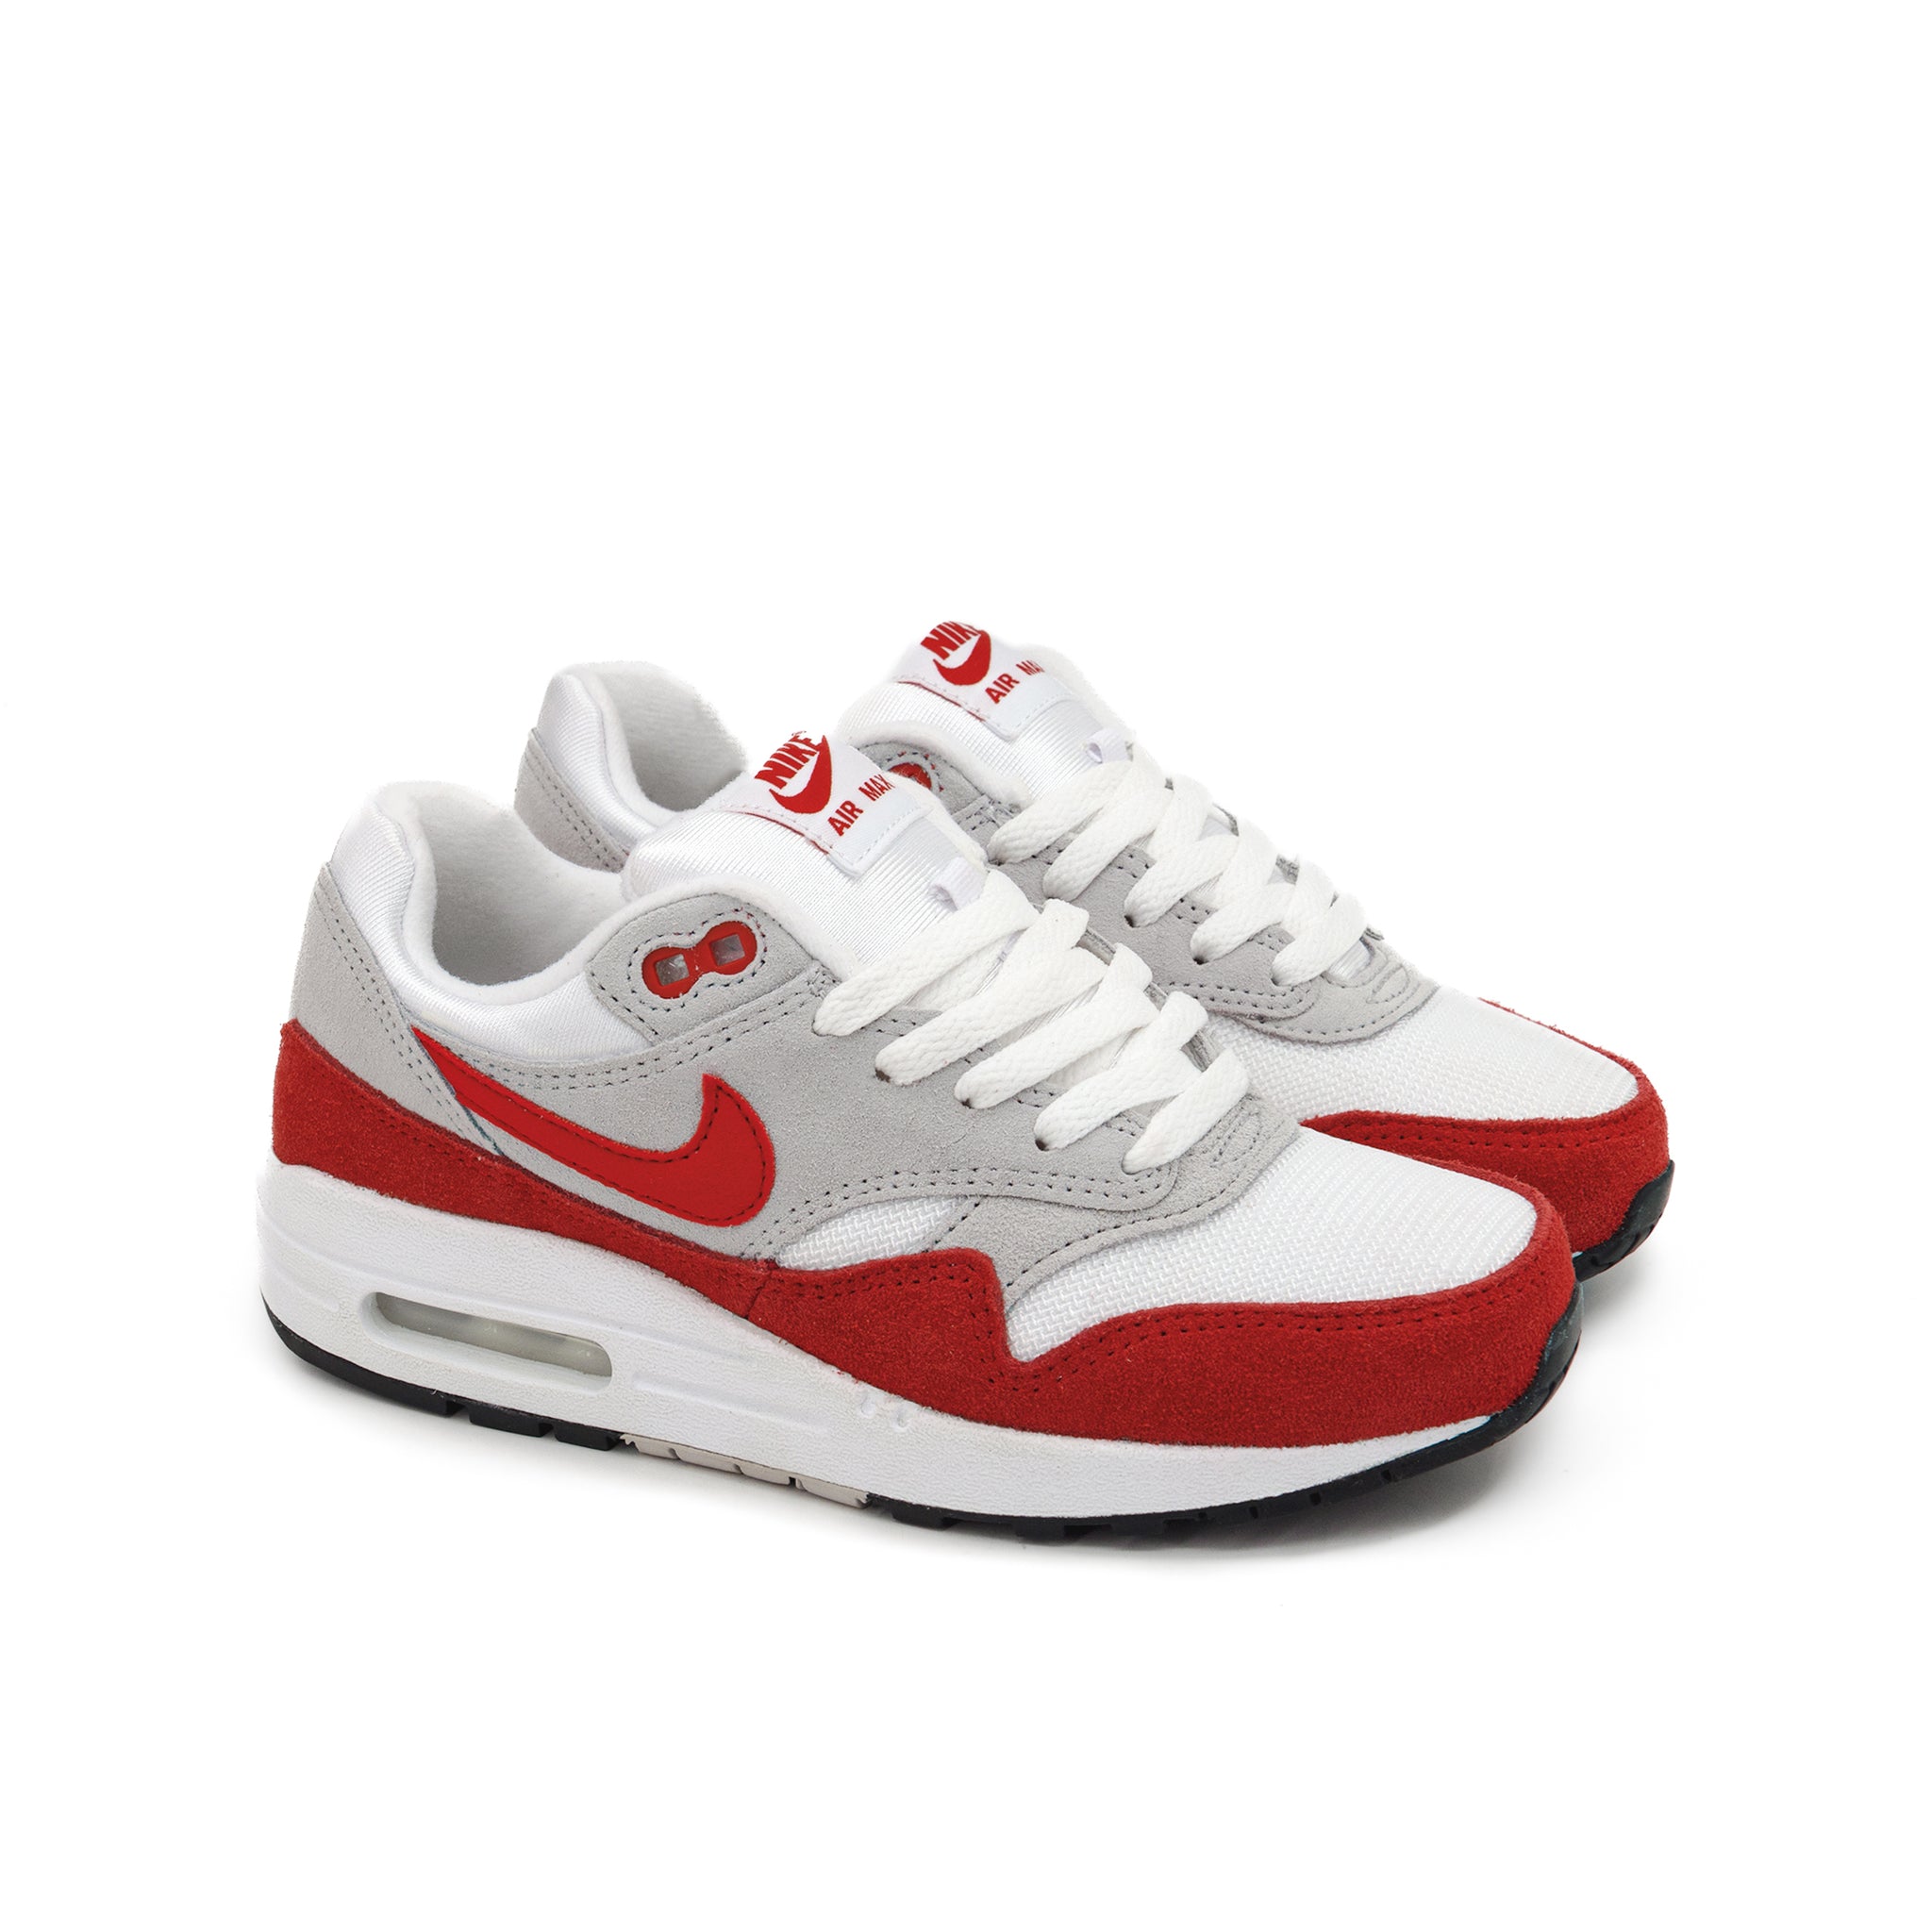 Bóveda Turismo escribir Nike Air Max 1 OG GS "Challenge Red" 555766-146 – Laced